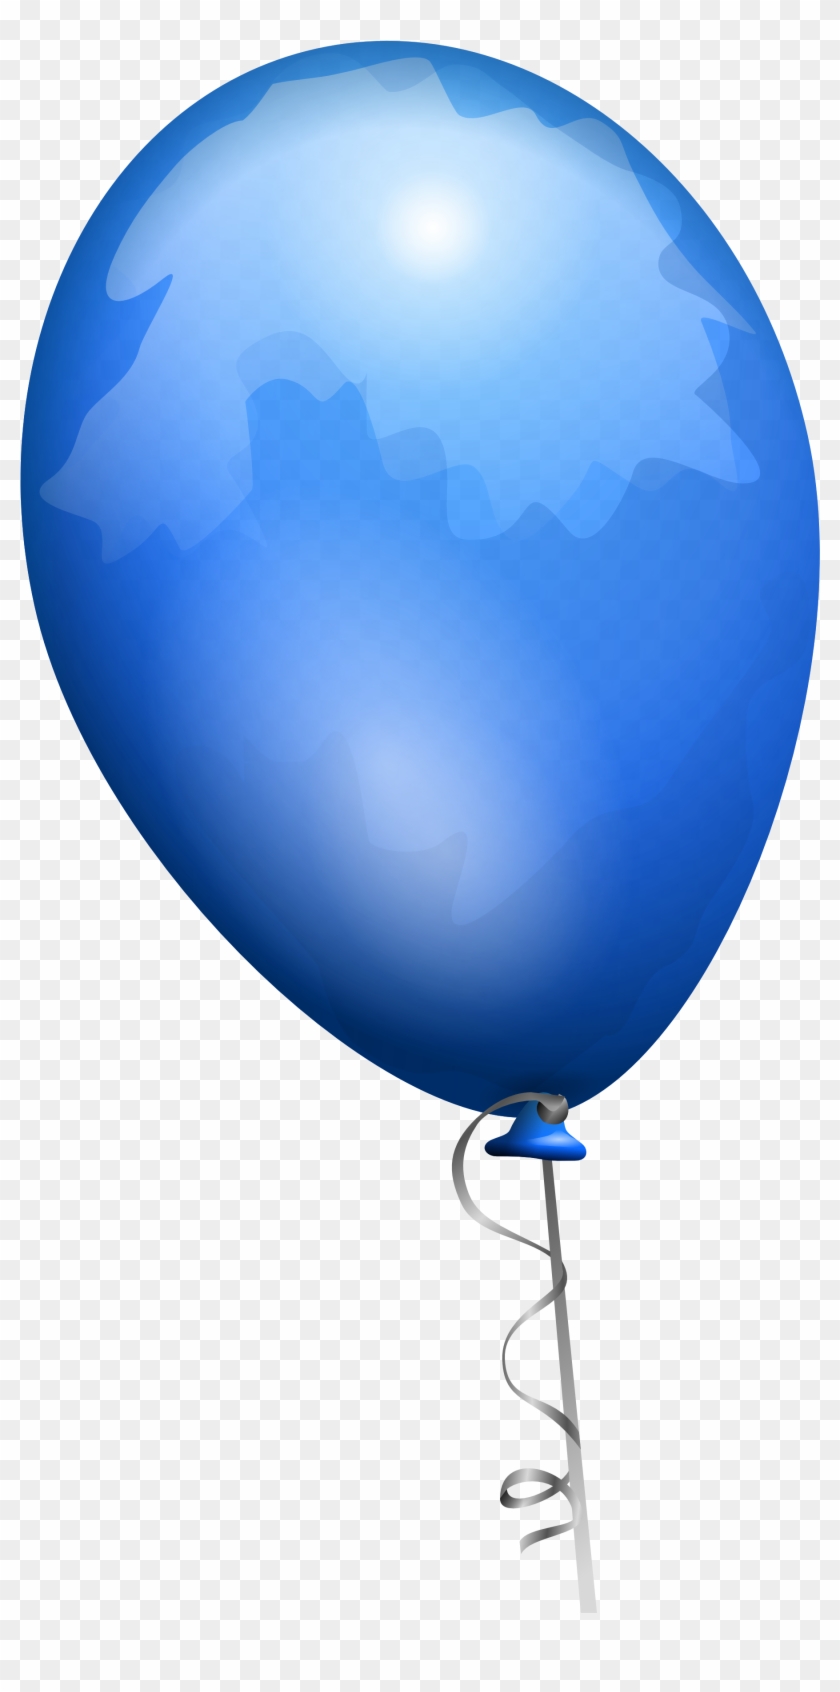 Red Balloon Png Image, Free Download - Balloon Clip Art Transparent Png #157219